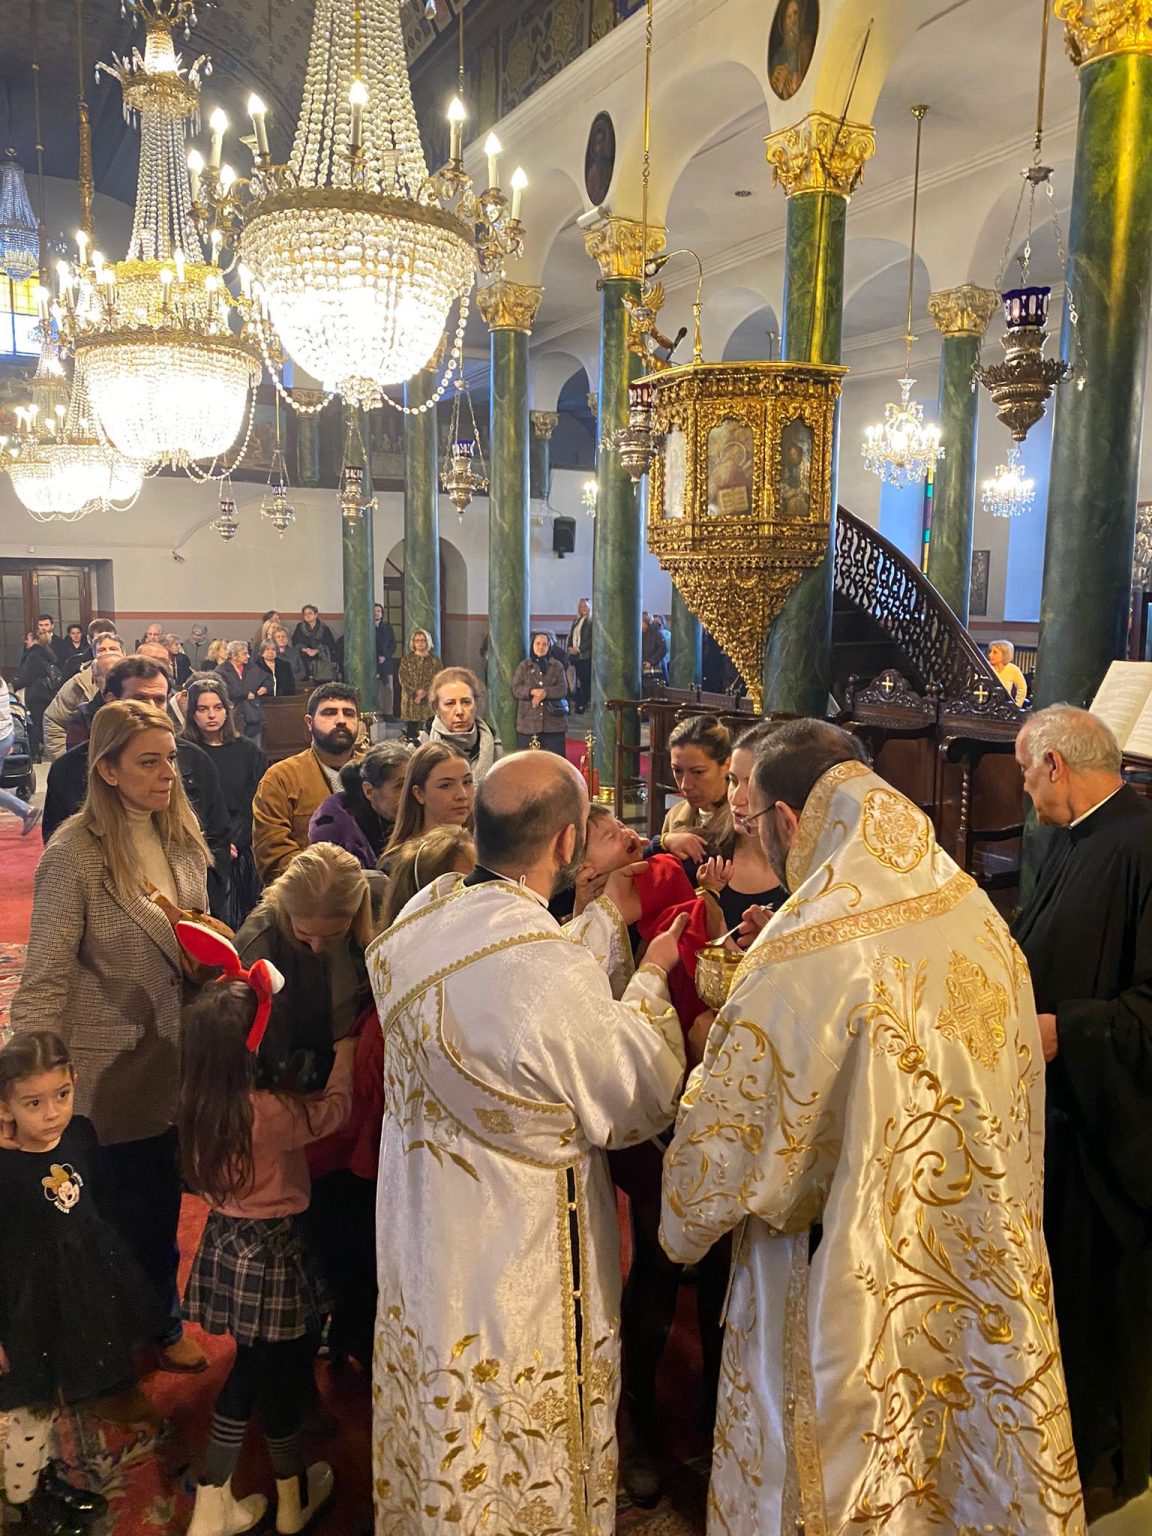 The Feast Day of Christmas at the Church of Saint Dimitrios in Tataoula, Constantinople